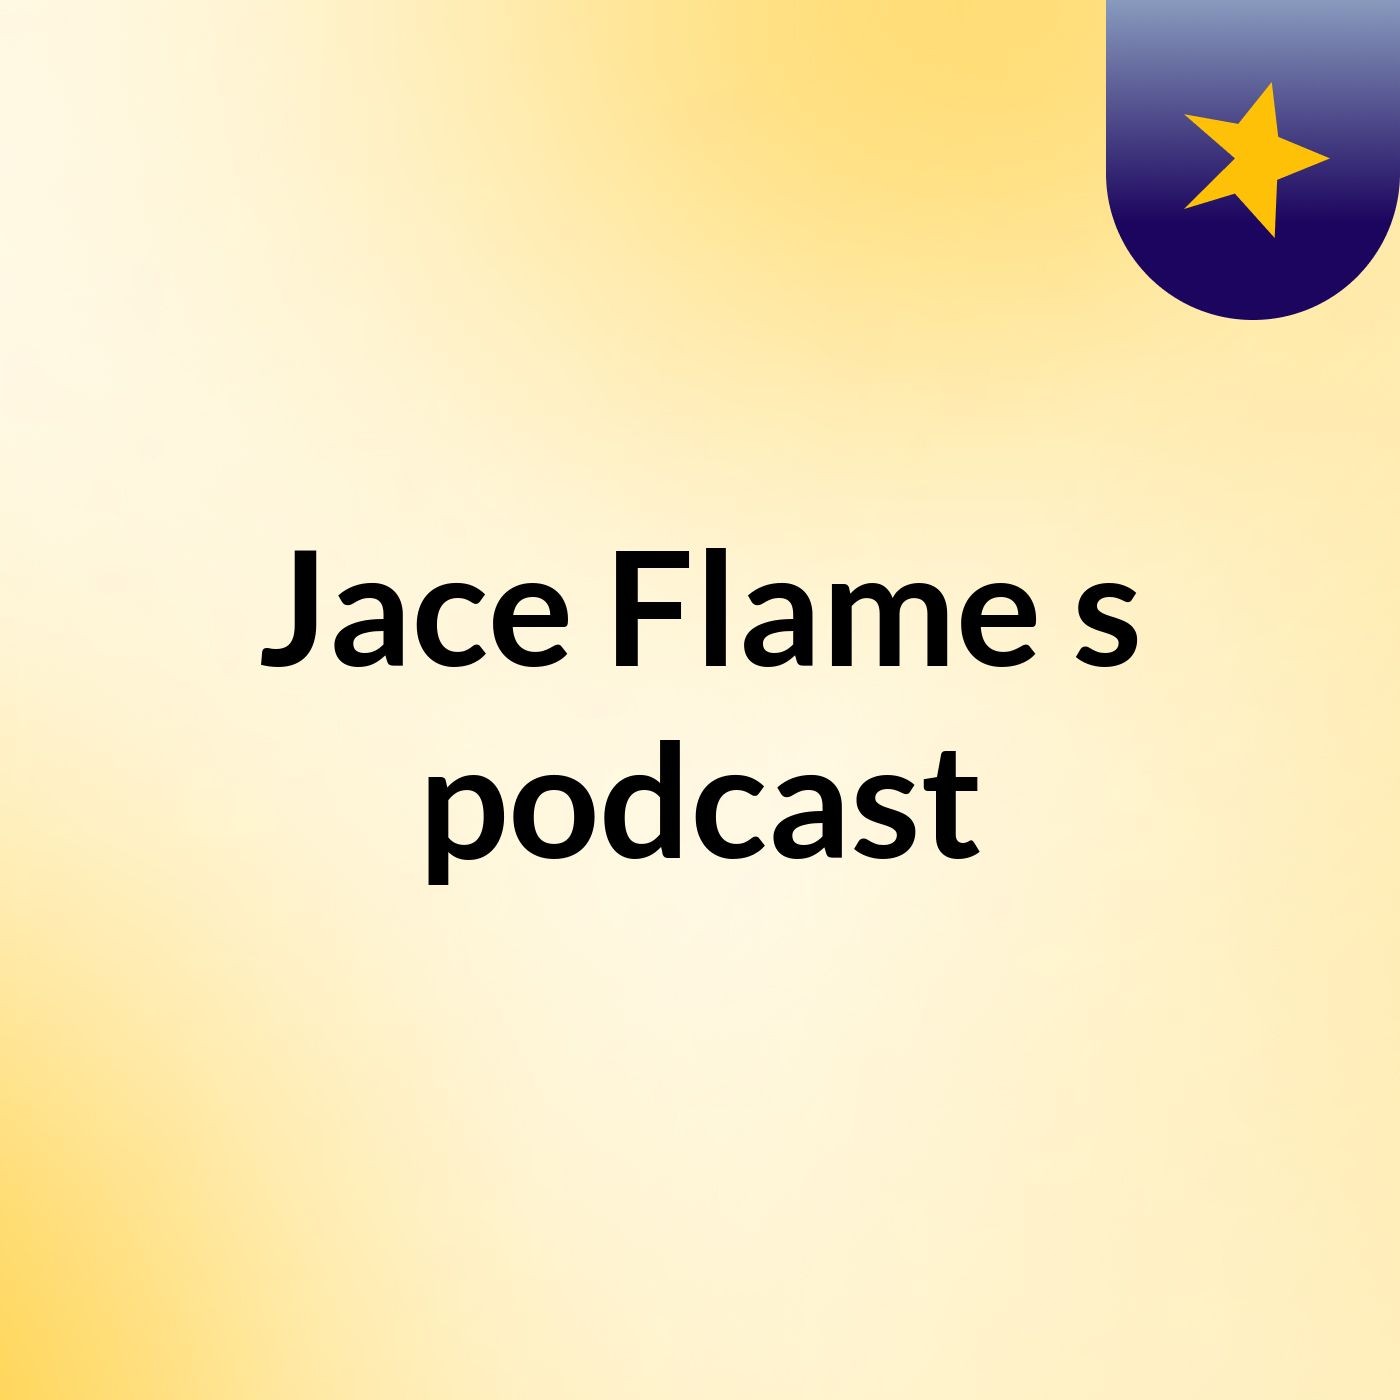 Episode 12 - Jace Flame's podcast